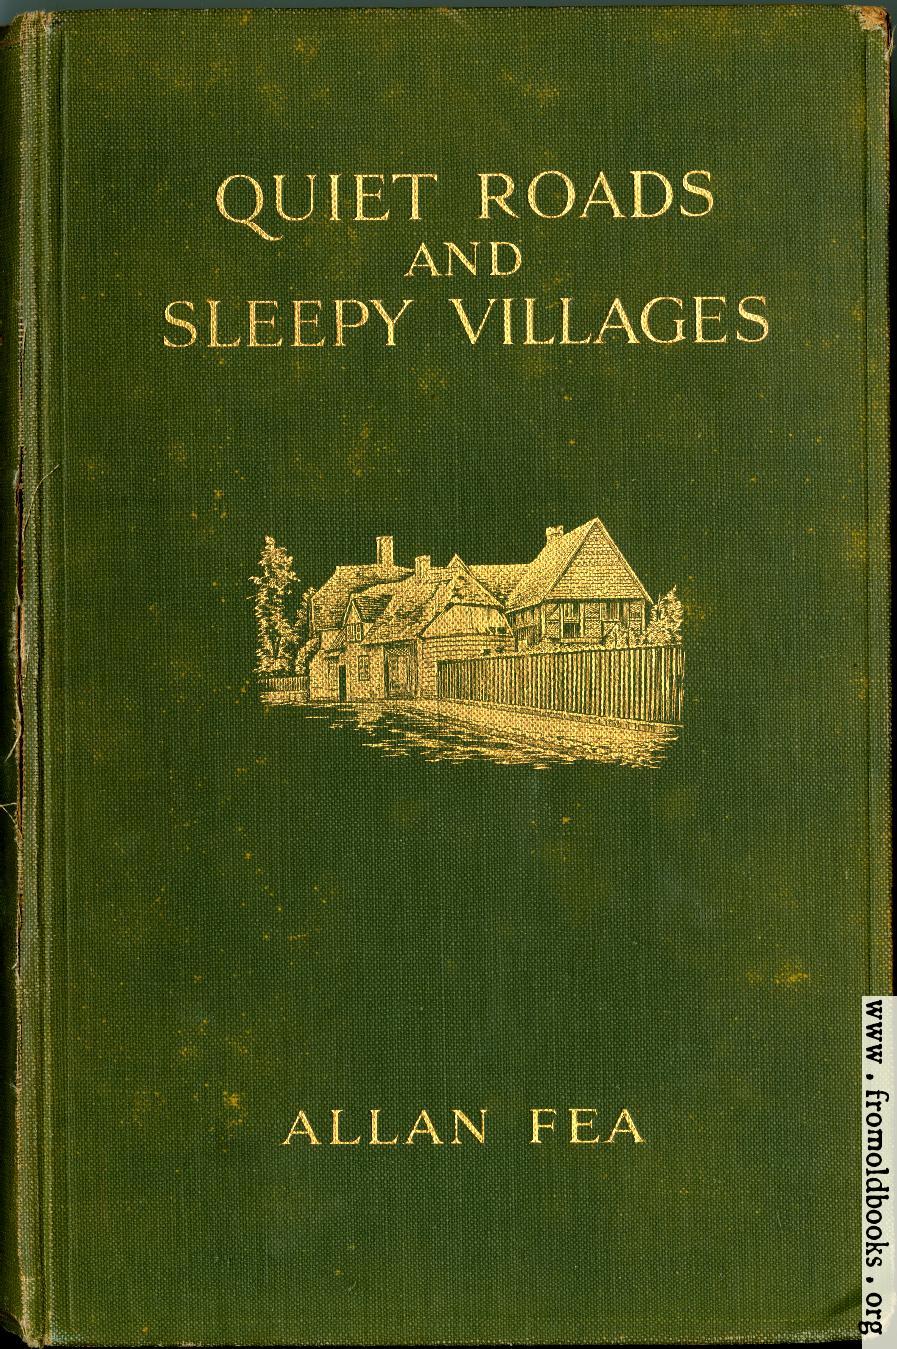 [Picture: Front Cover, Fea “Quiet Roads and Sleepy Villges”, McBride, Nast & Co., New York, 1914]